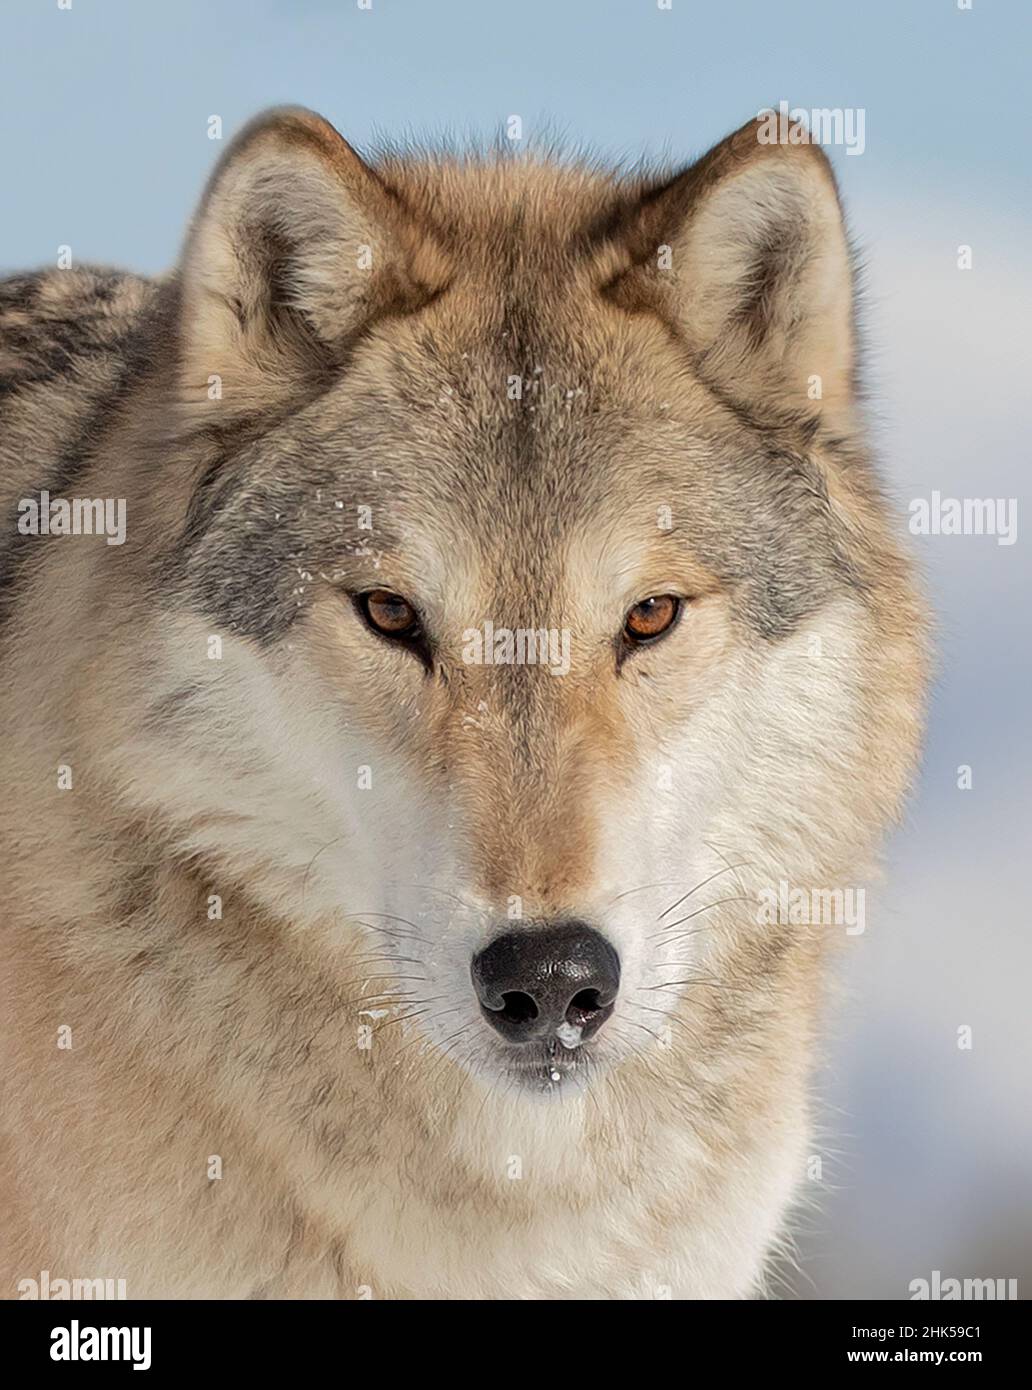 Tundra Wolf (Canis lupus albus) closeup in the winter snow with the mountains in the background Stock Photo